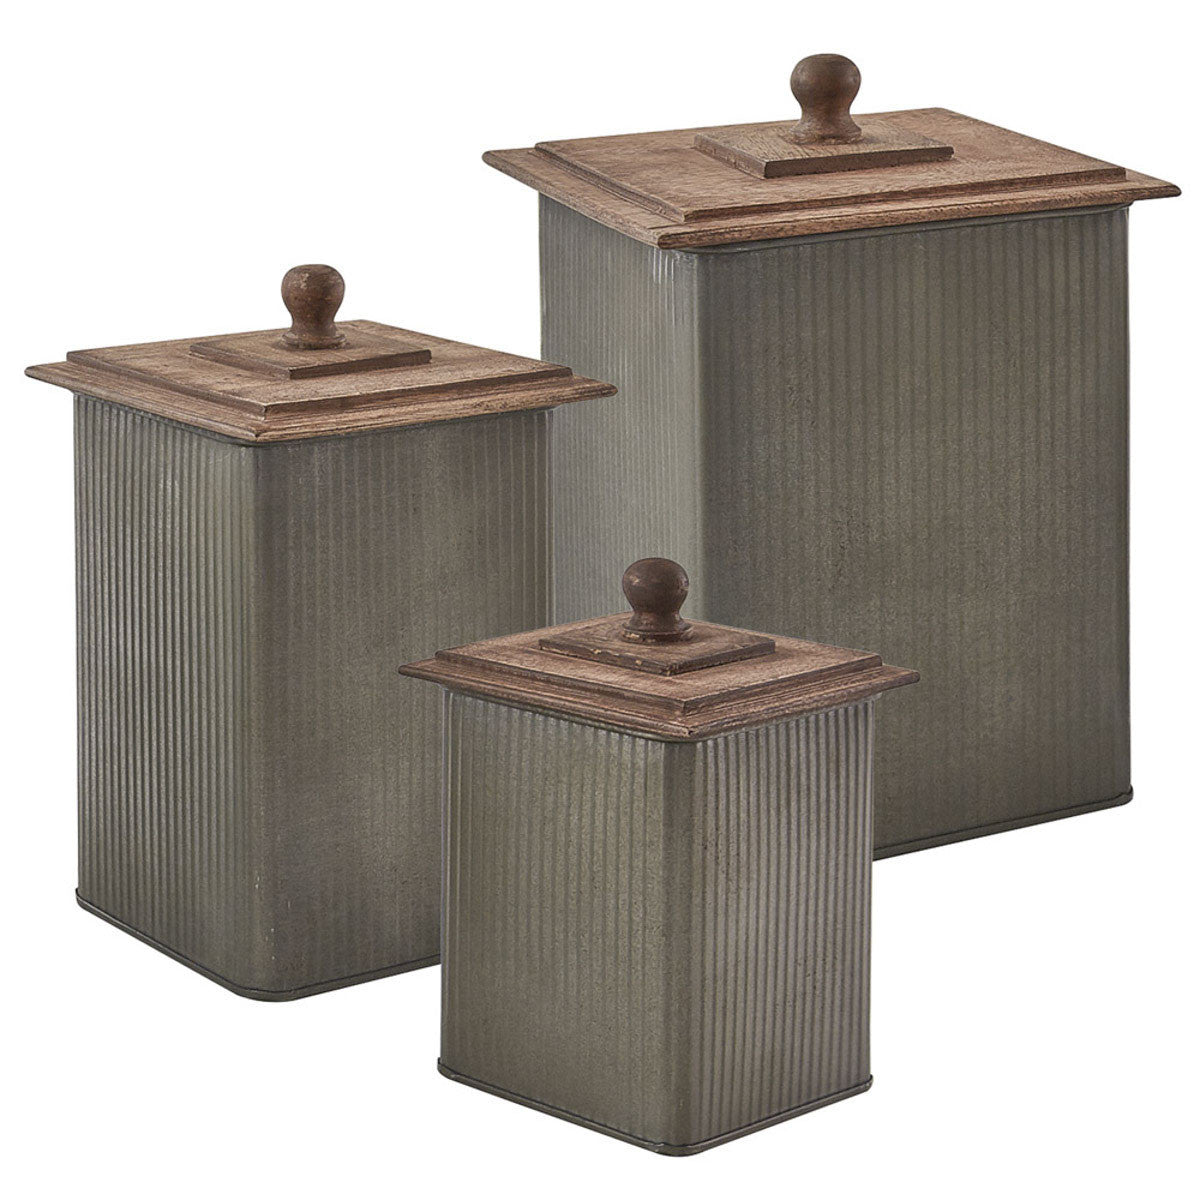 Norwood Canisters with Wood Lids - Set of 3